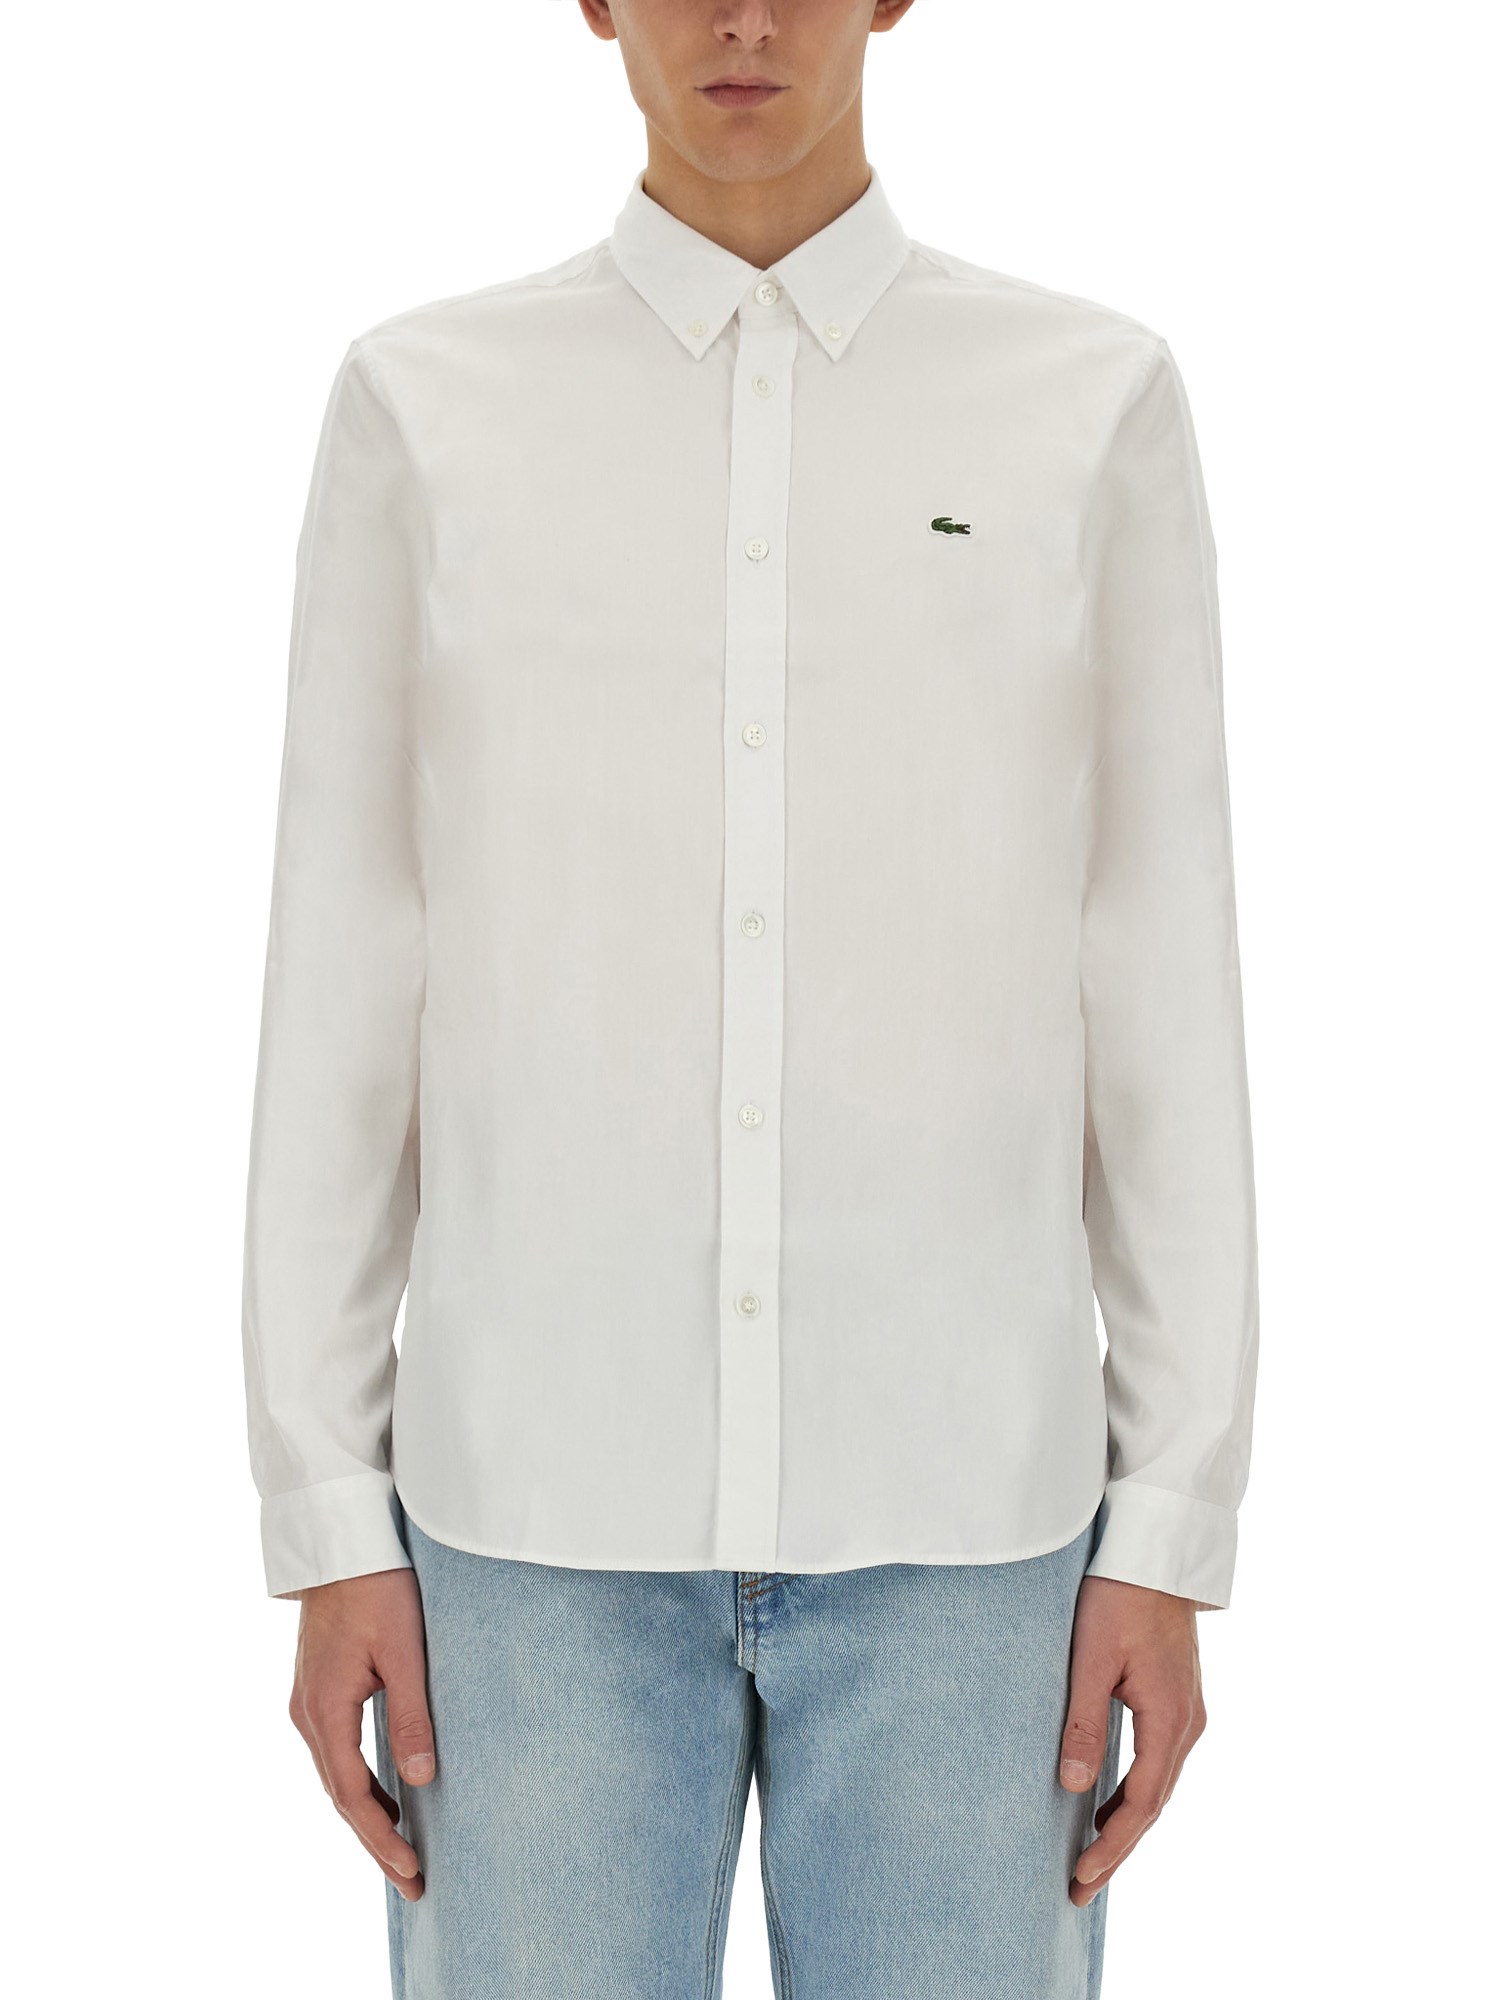 Lacoste lacoste shirt with logo